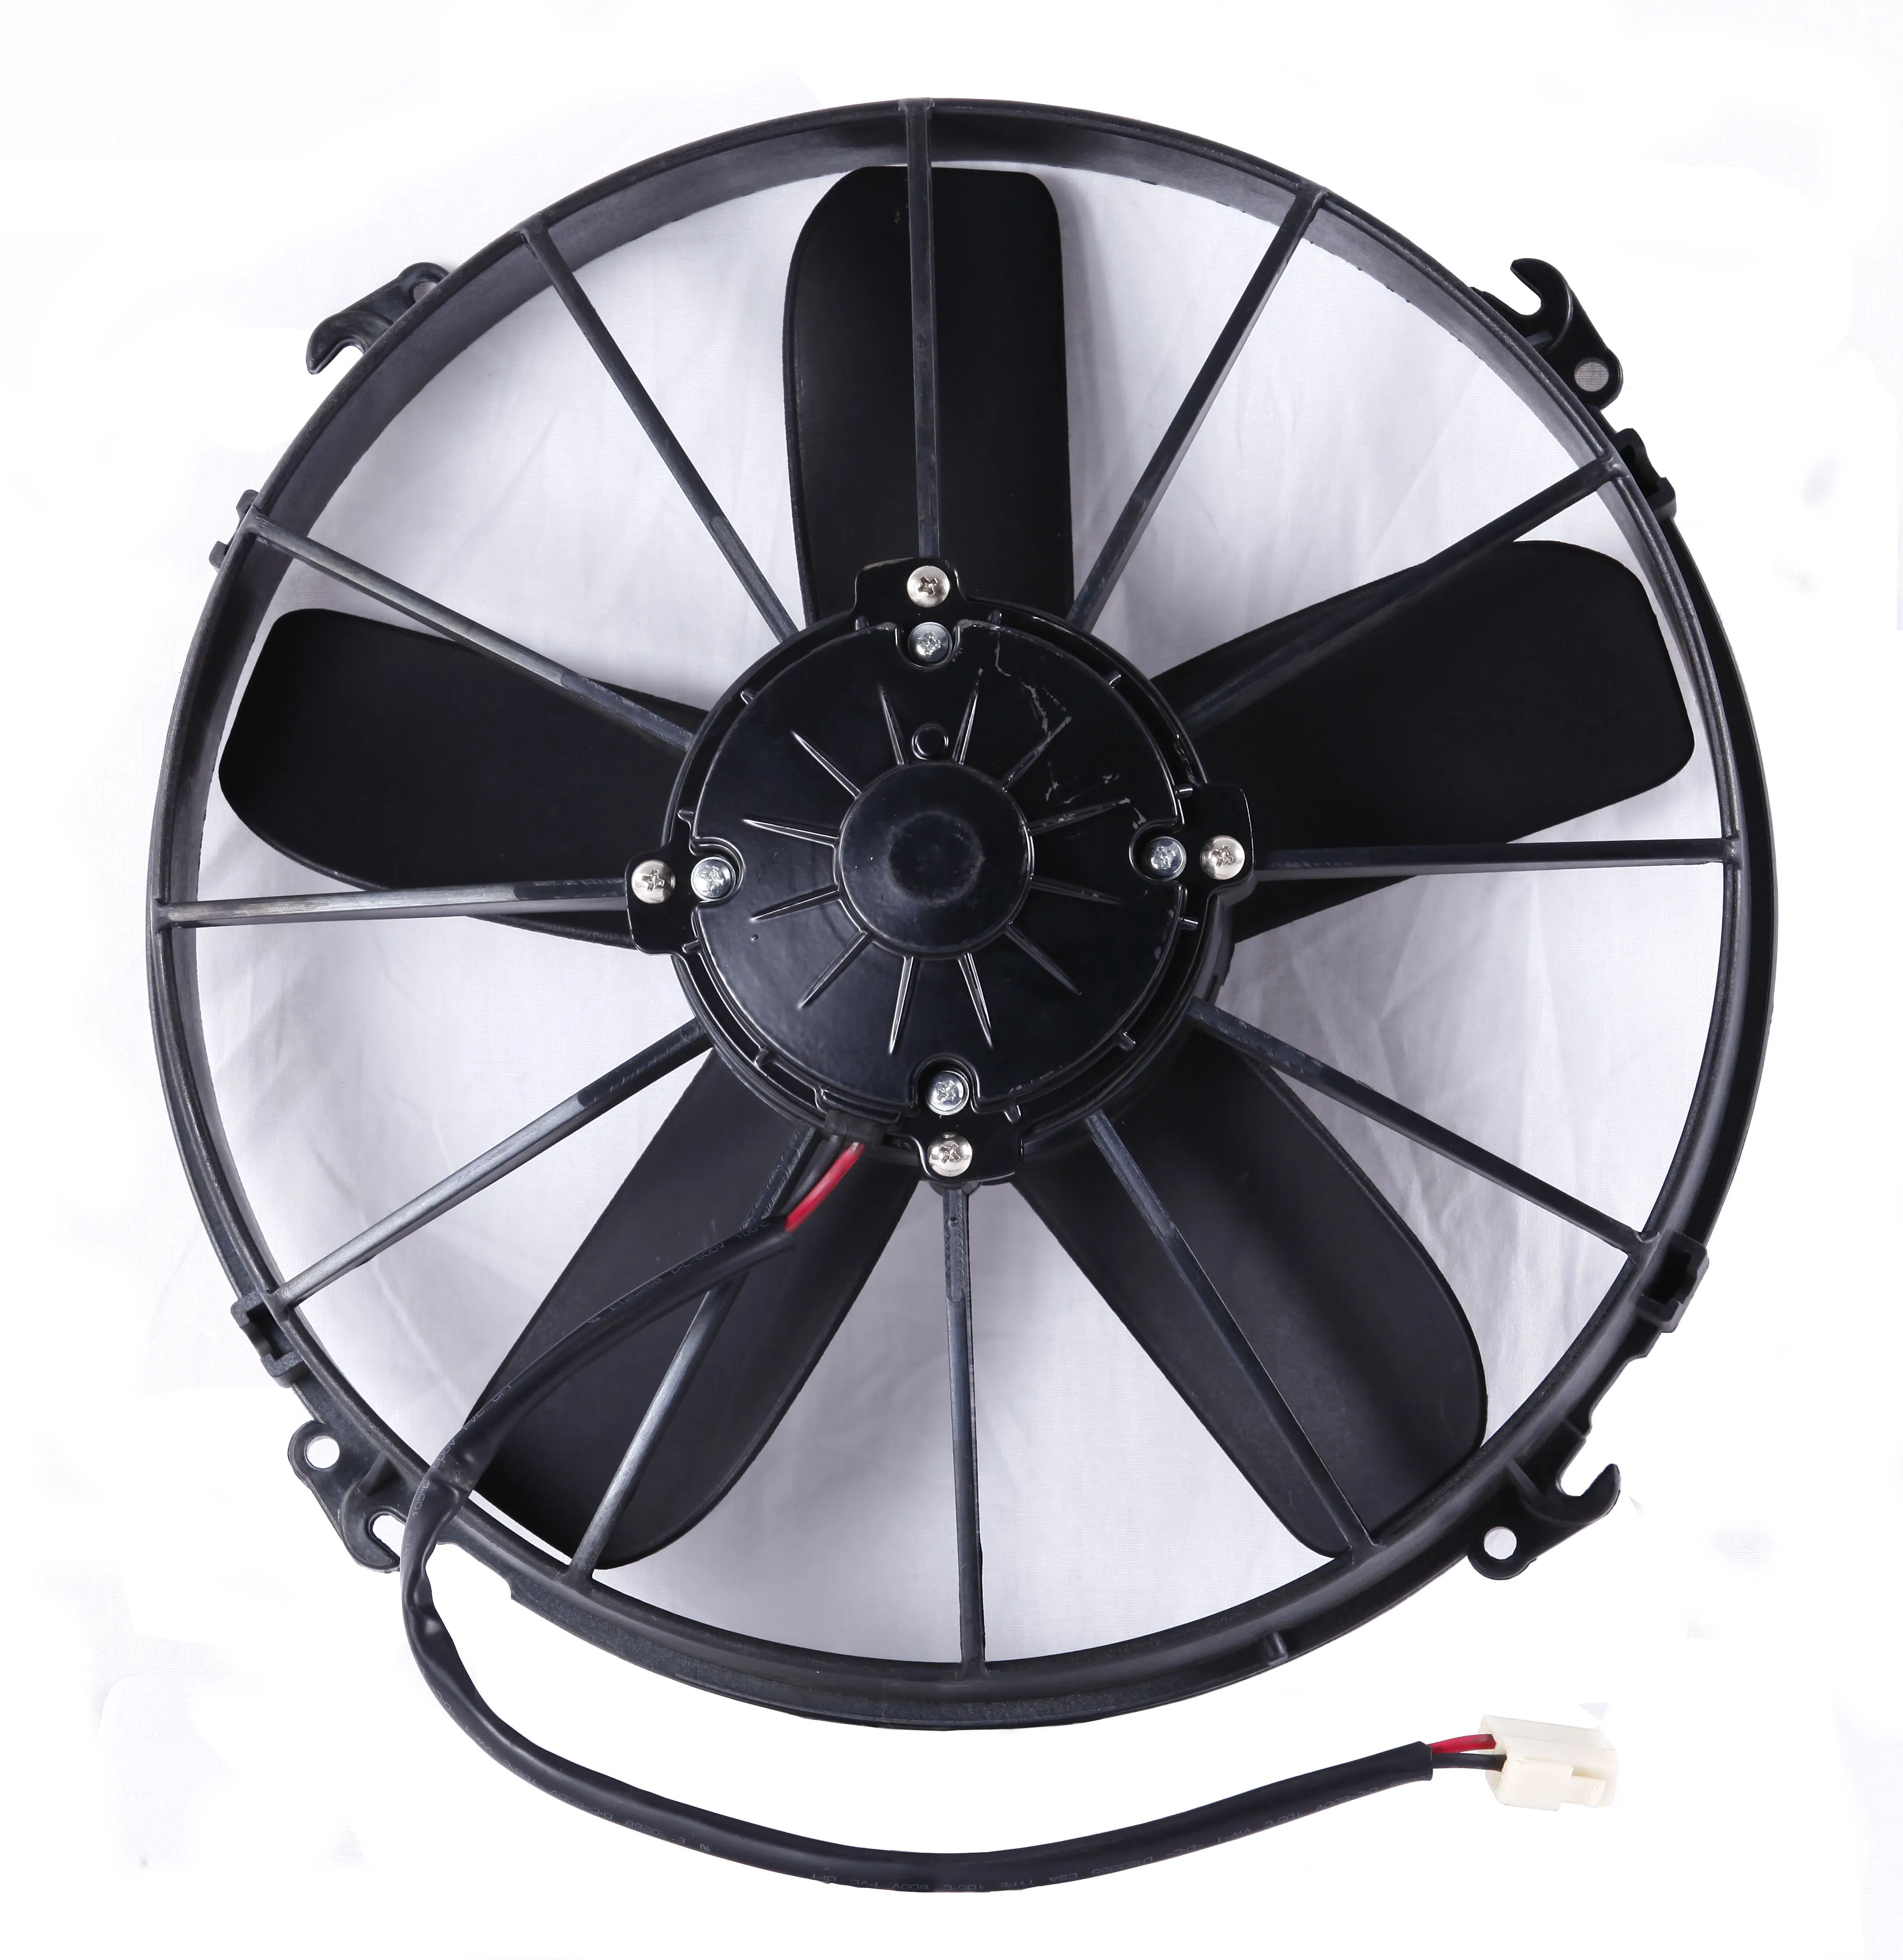 12V and 24V DC brush motor axial fan replace spal VA01 series for bus condenser fan push and pull from China manufacture